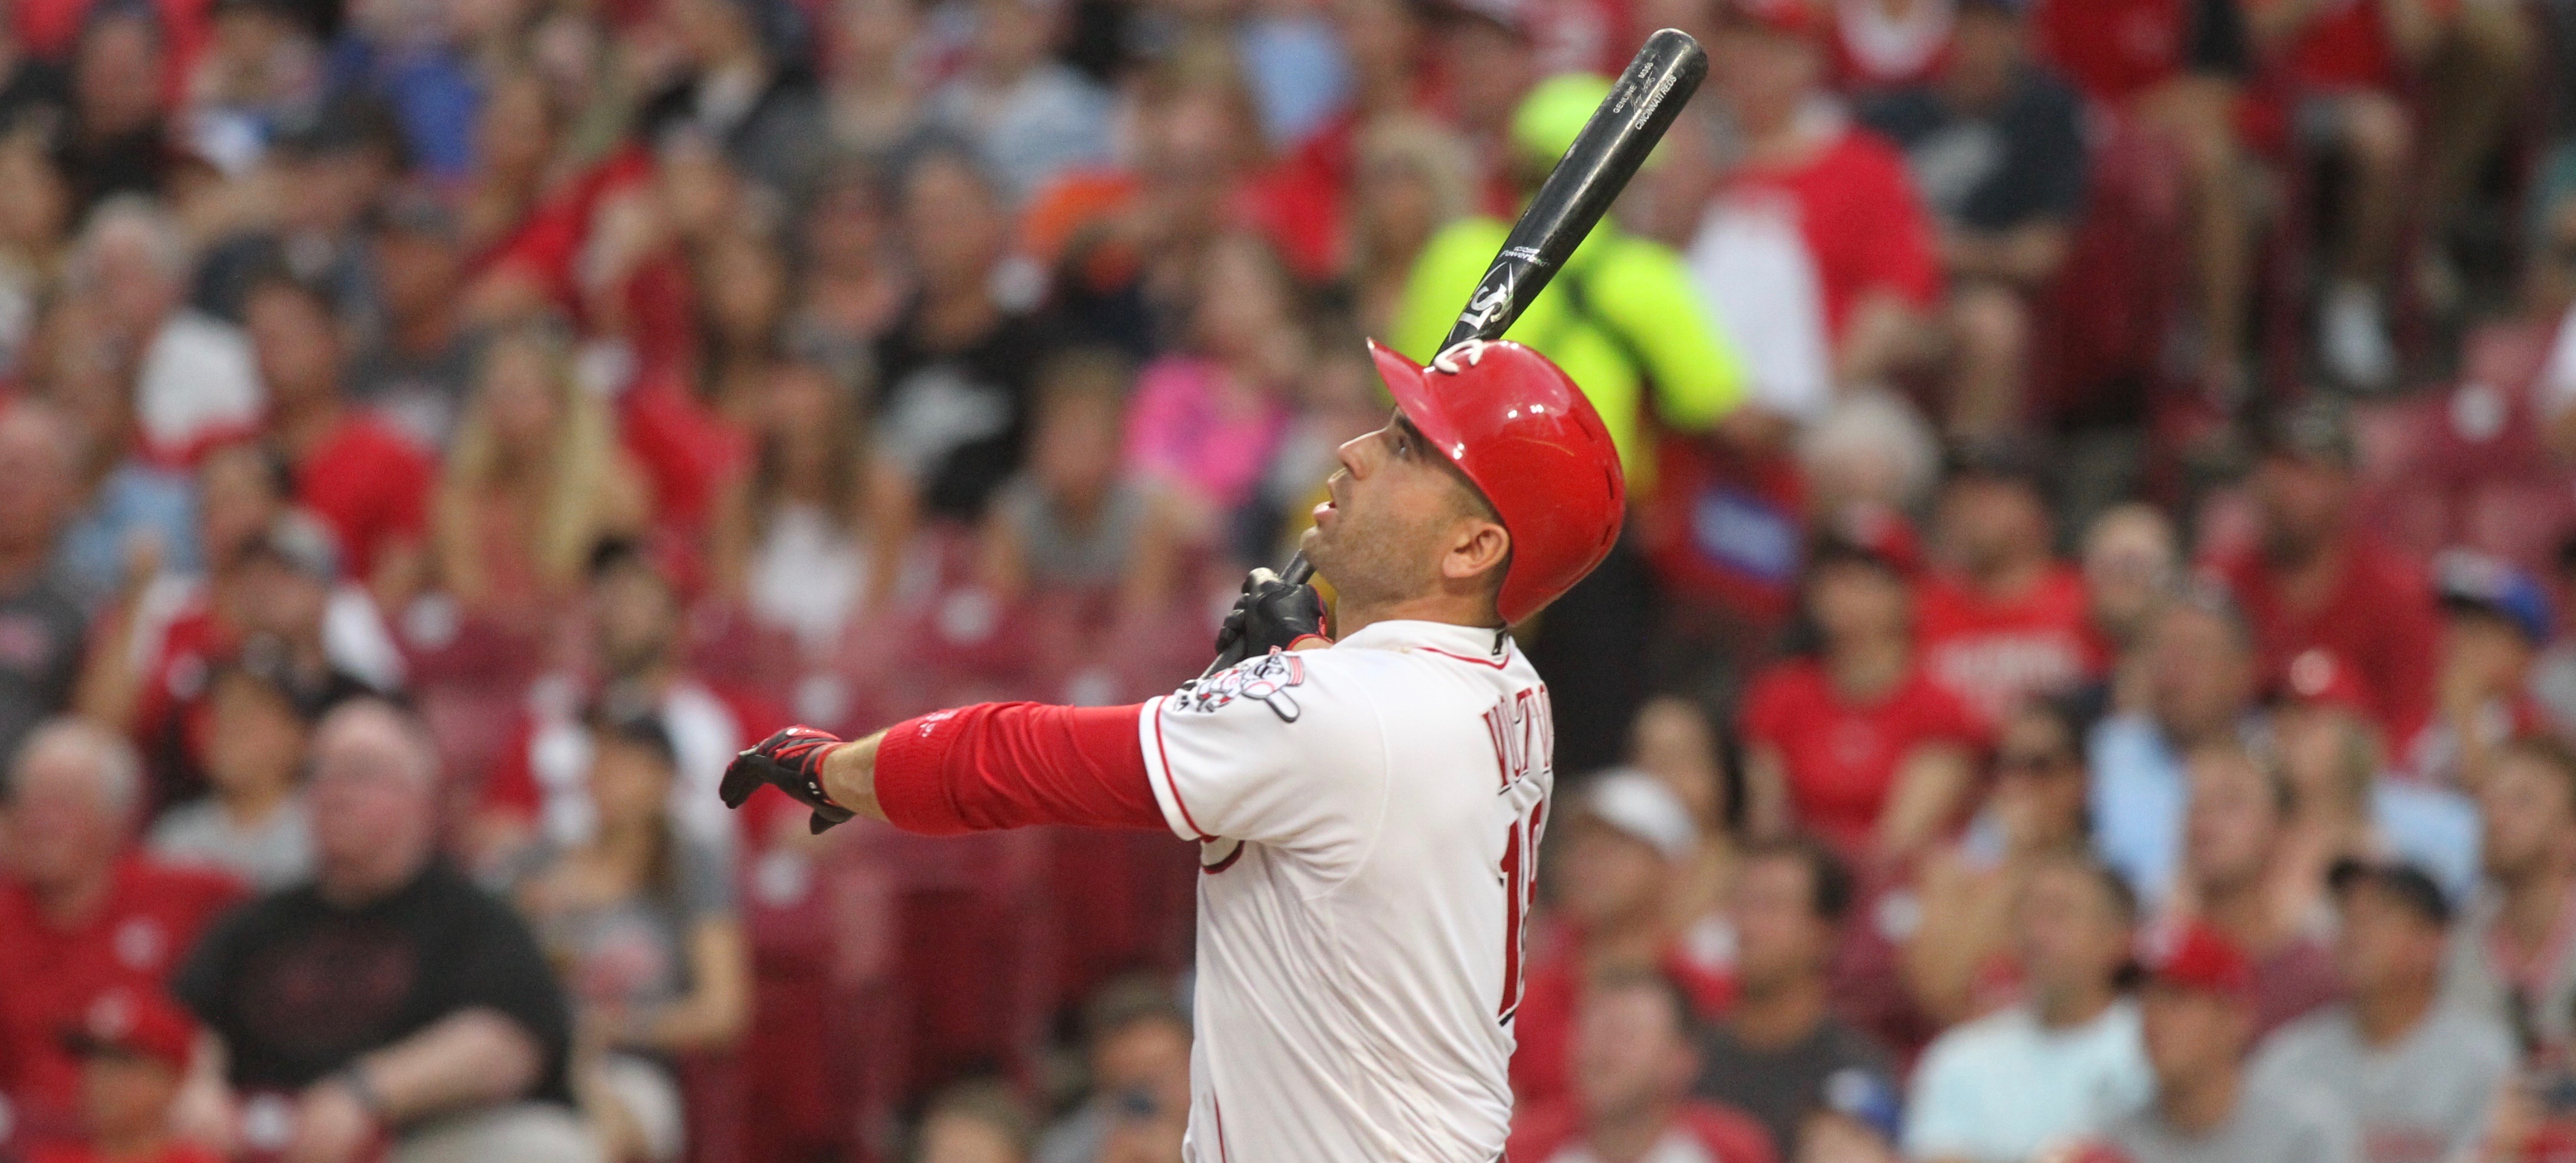 Joey Votto stats boosted by young fan